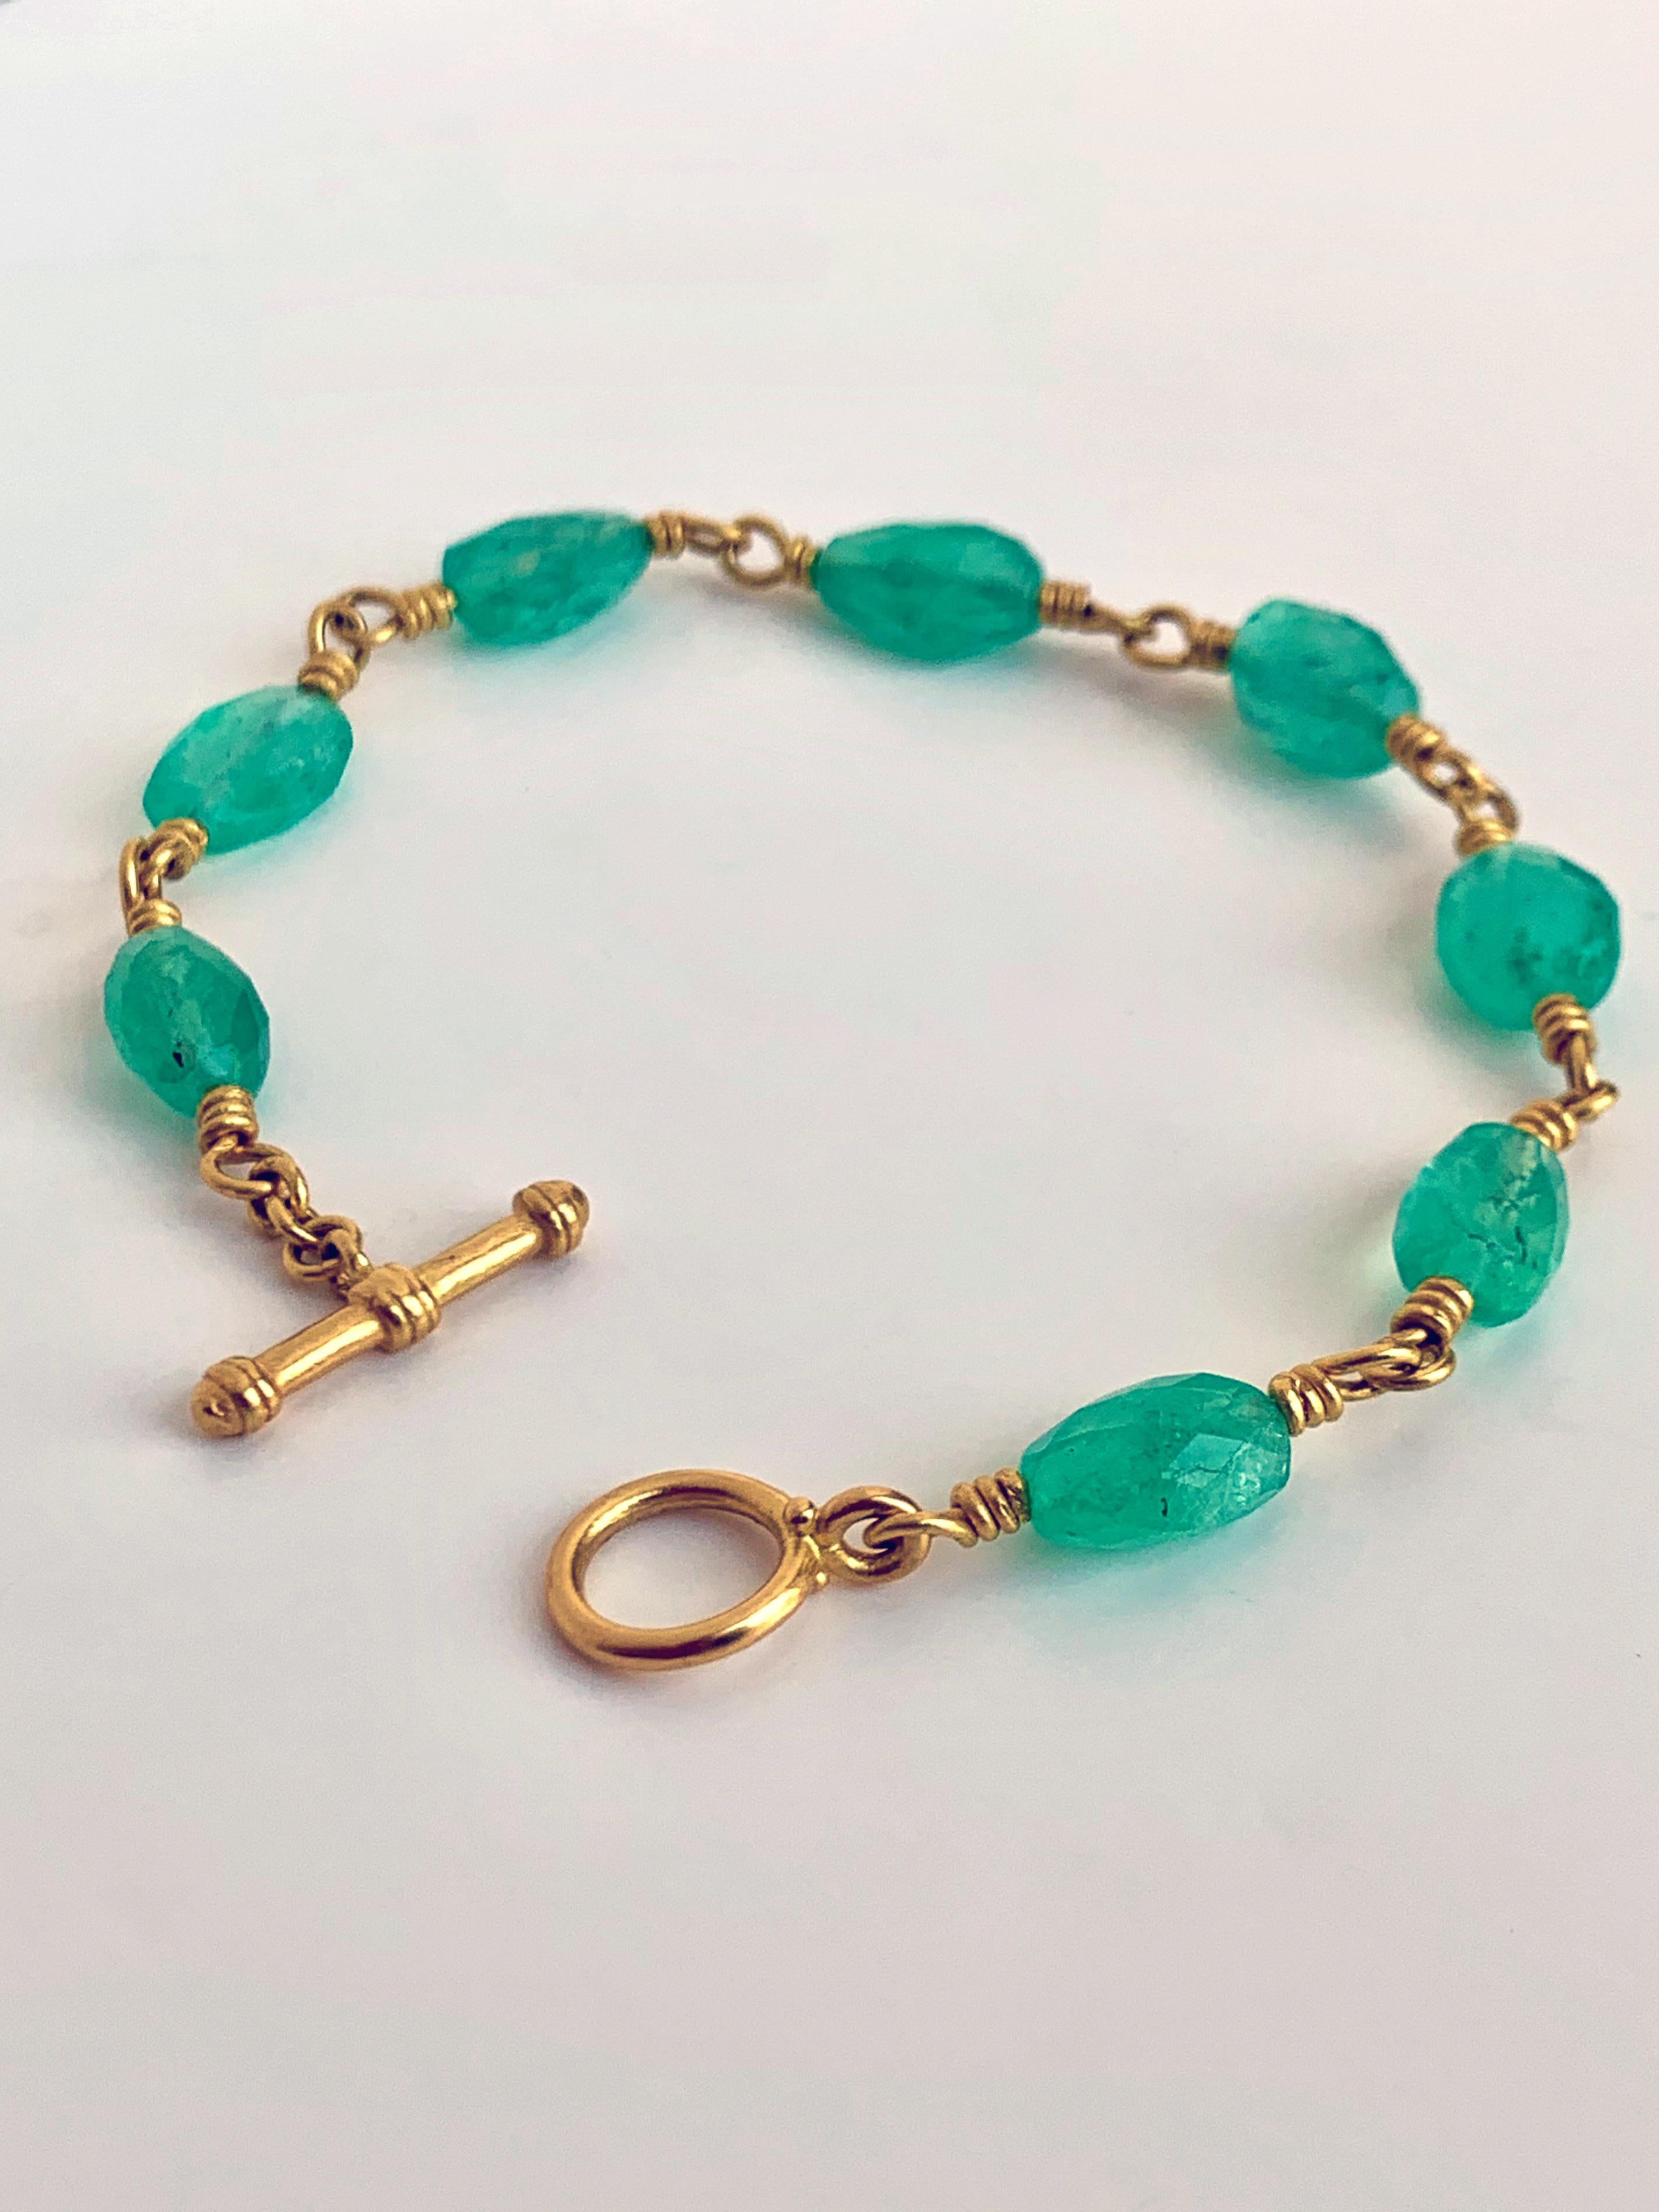 Emerald's history with man dates back more than 3000 years. They were worn by Cleopatra. Shah Jahan who built the Taj Mahal, inscribed ancient texts into the stones and wore them as talismans. This bracelet carries 29 carats of emeralds and linked